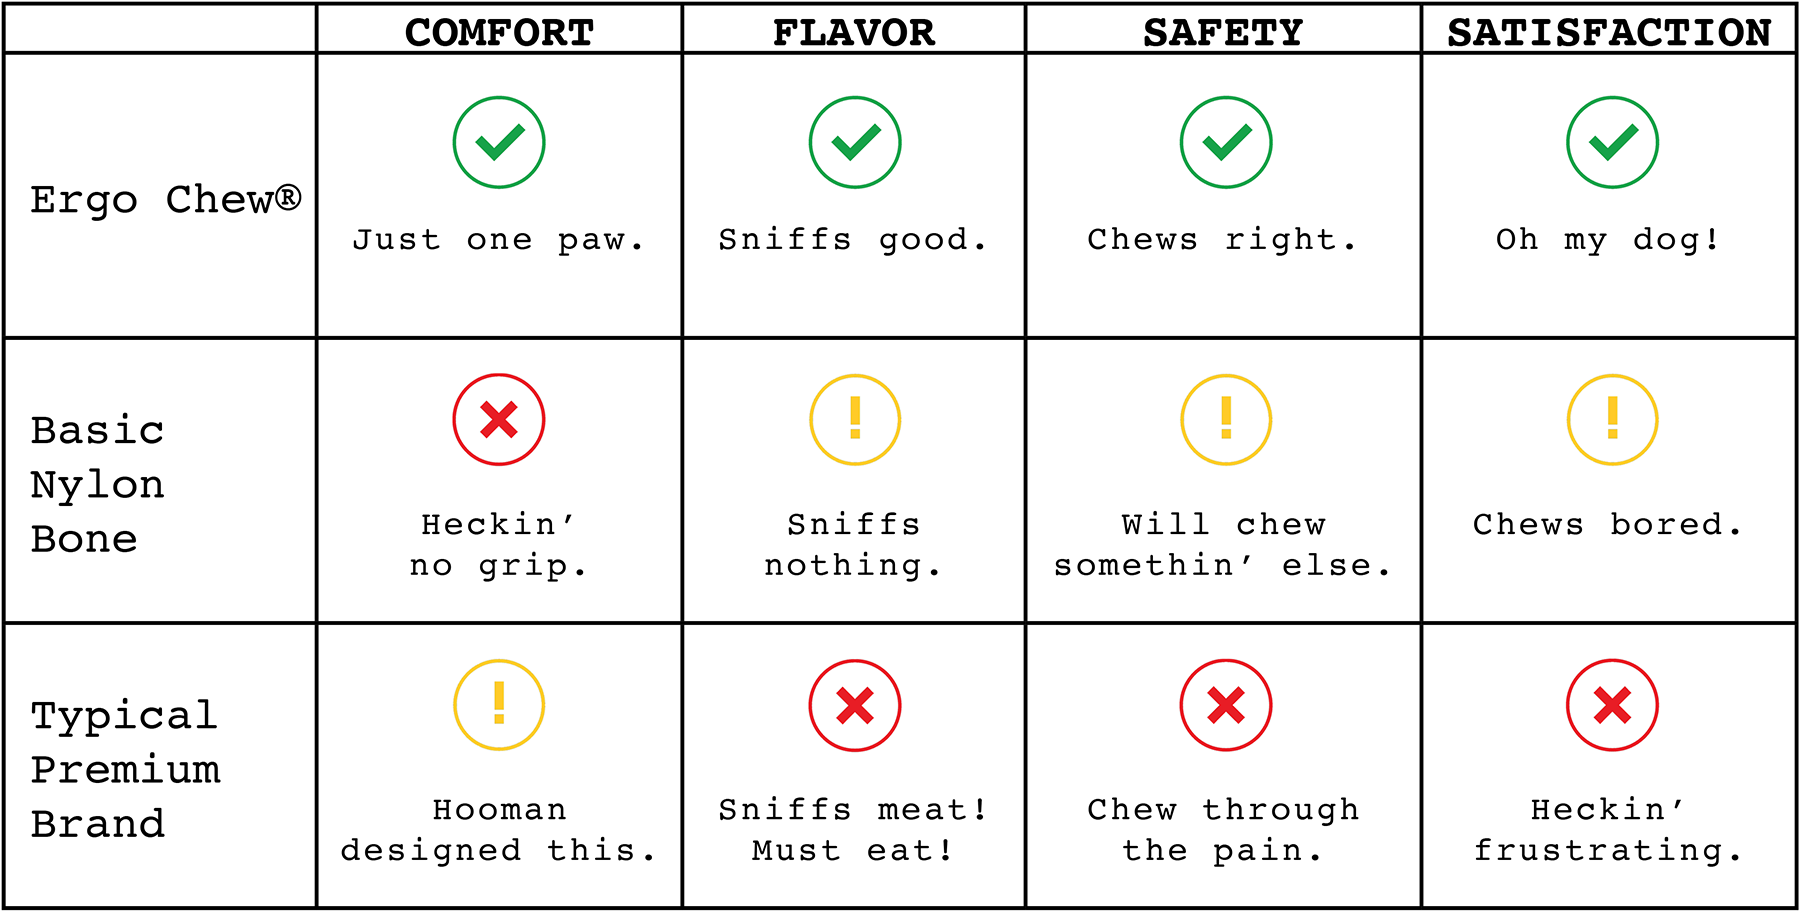 Ergo Chew Chew Chart showing benefits of Ergo Chew over other brands along the dimensions of comfort, flavor, safety and satisfaction